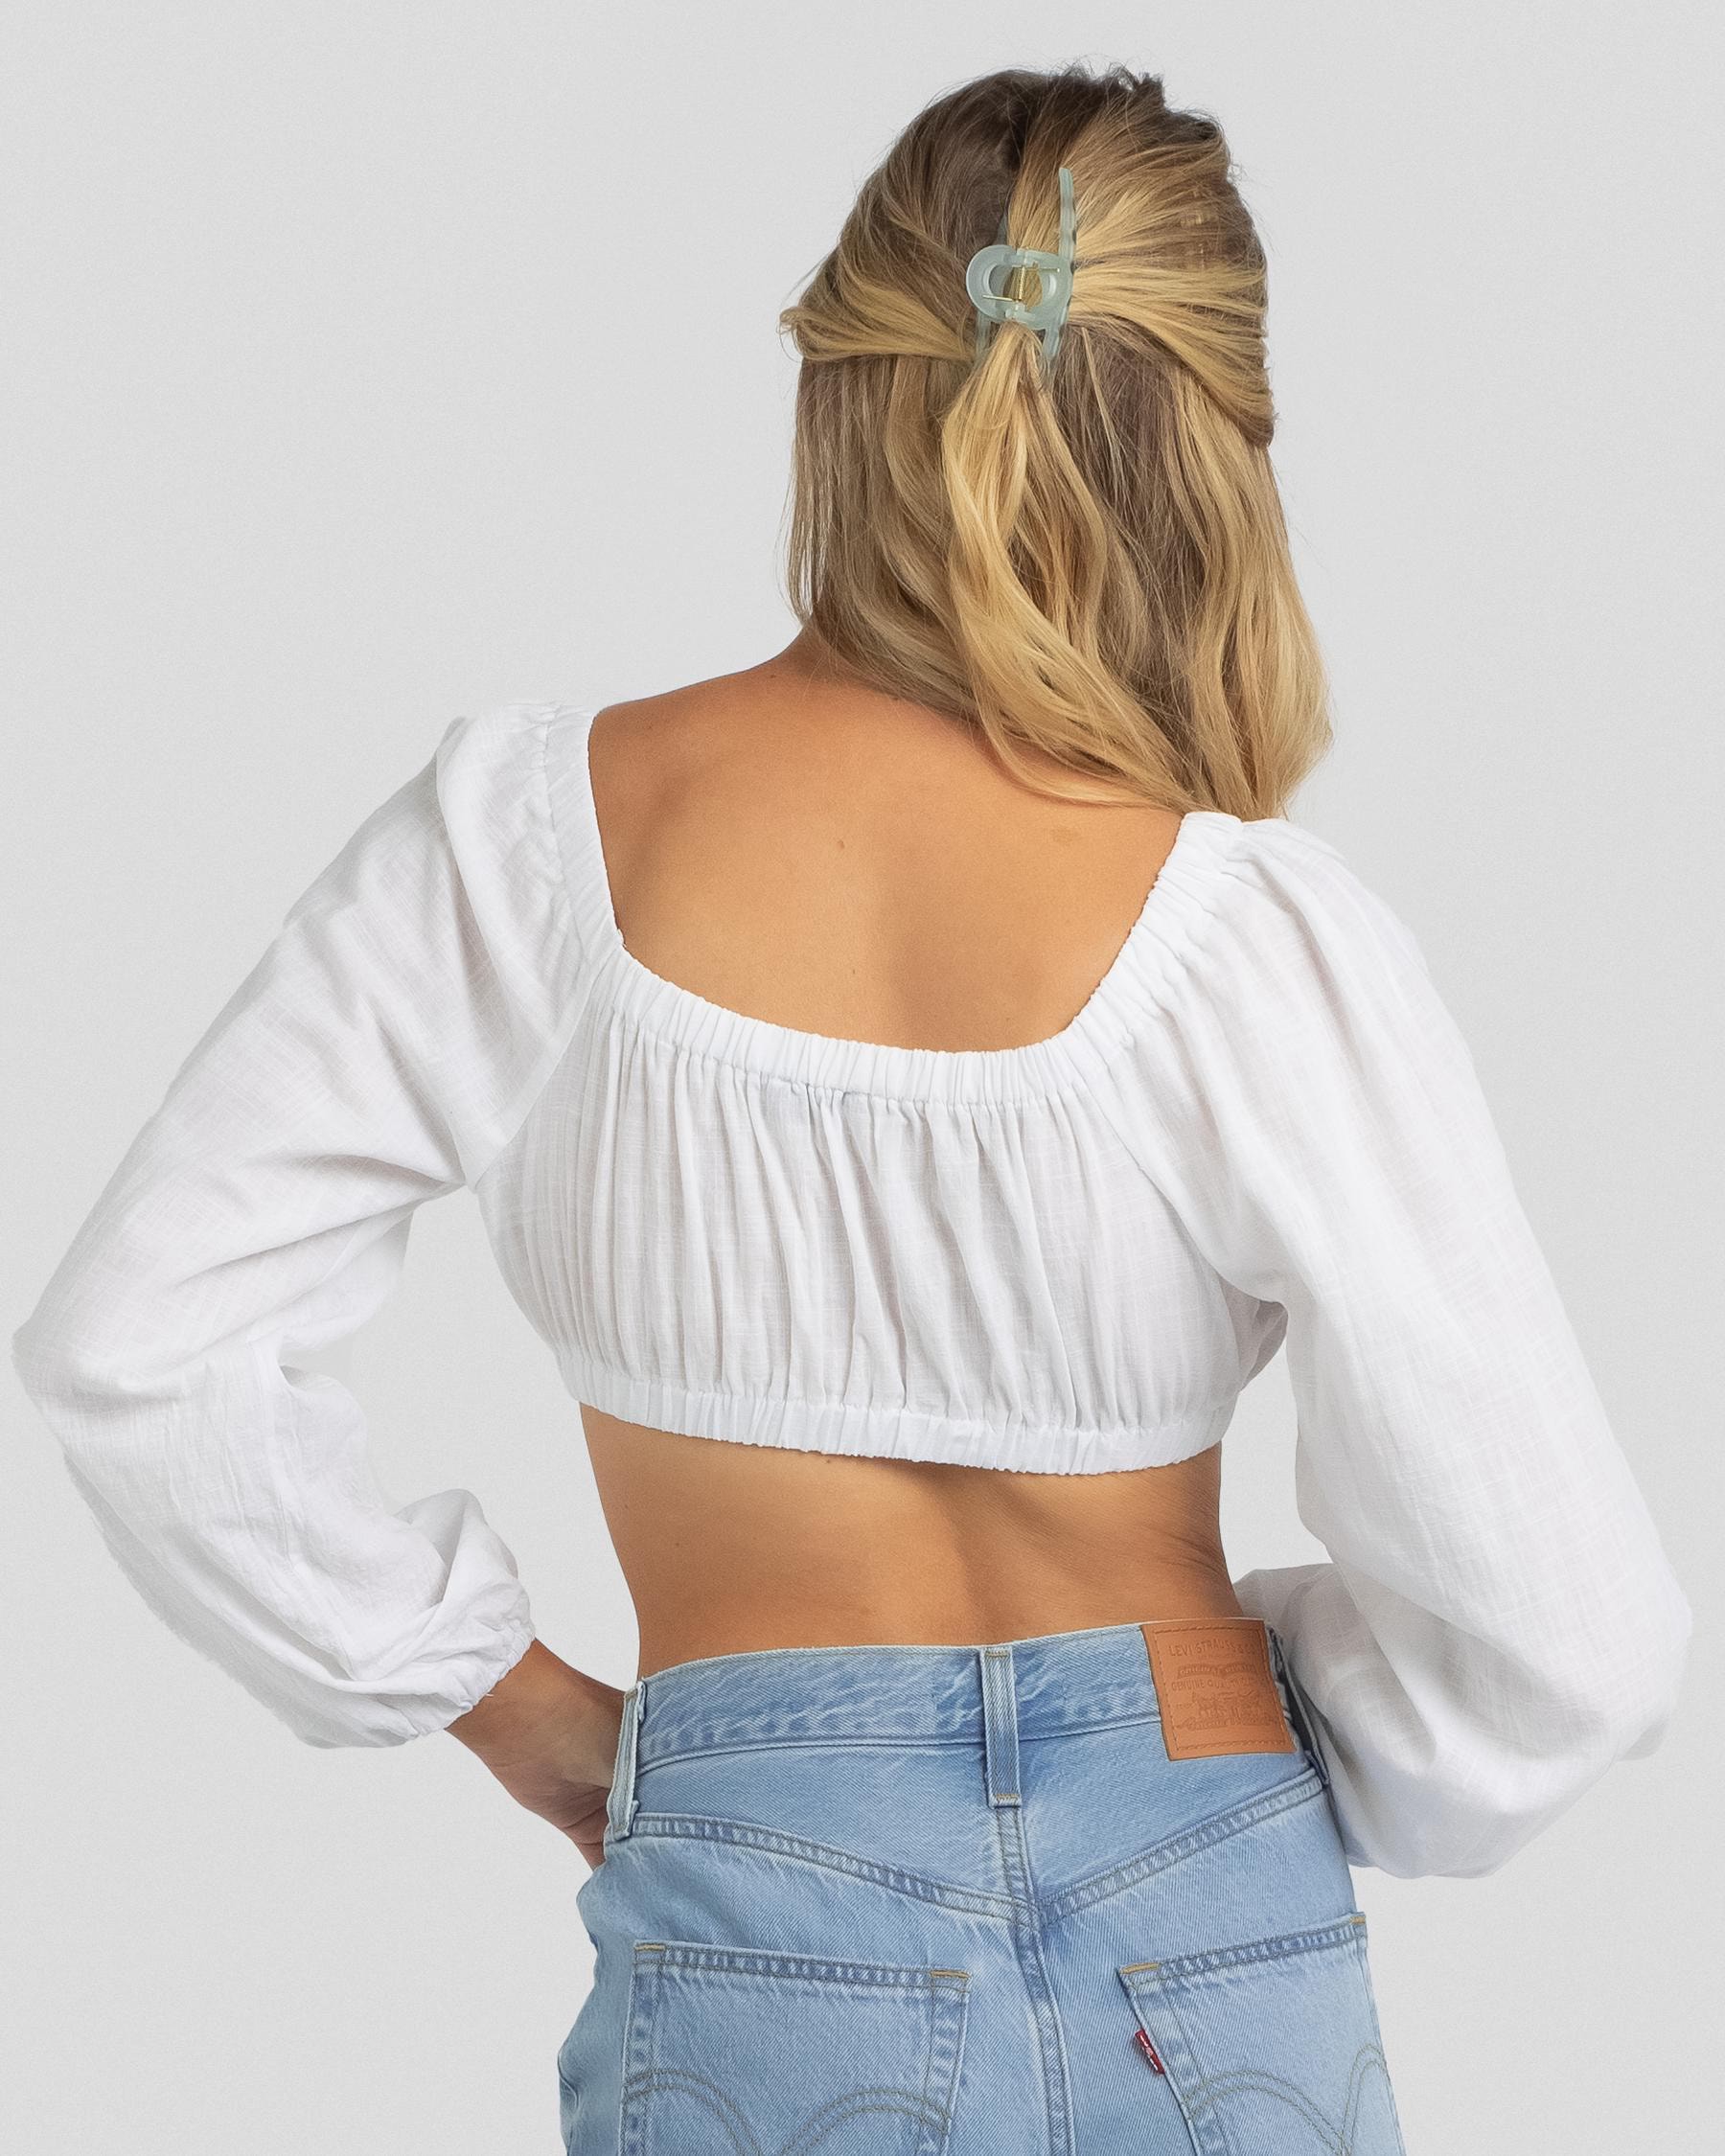 Ava And Ever Indigo Top In White - Fast Shipping & Easy Returns - City ...